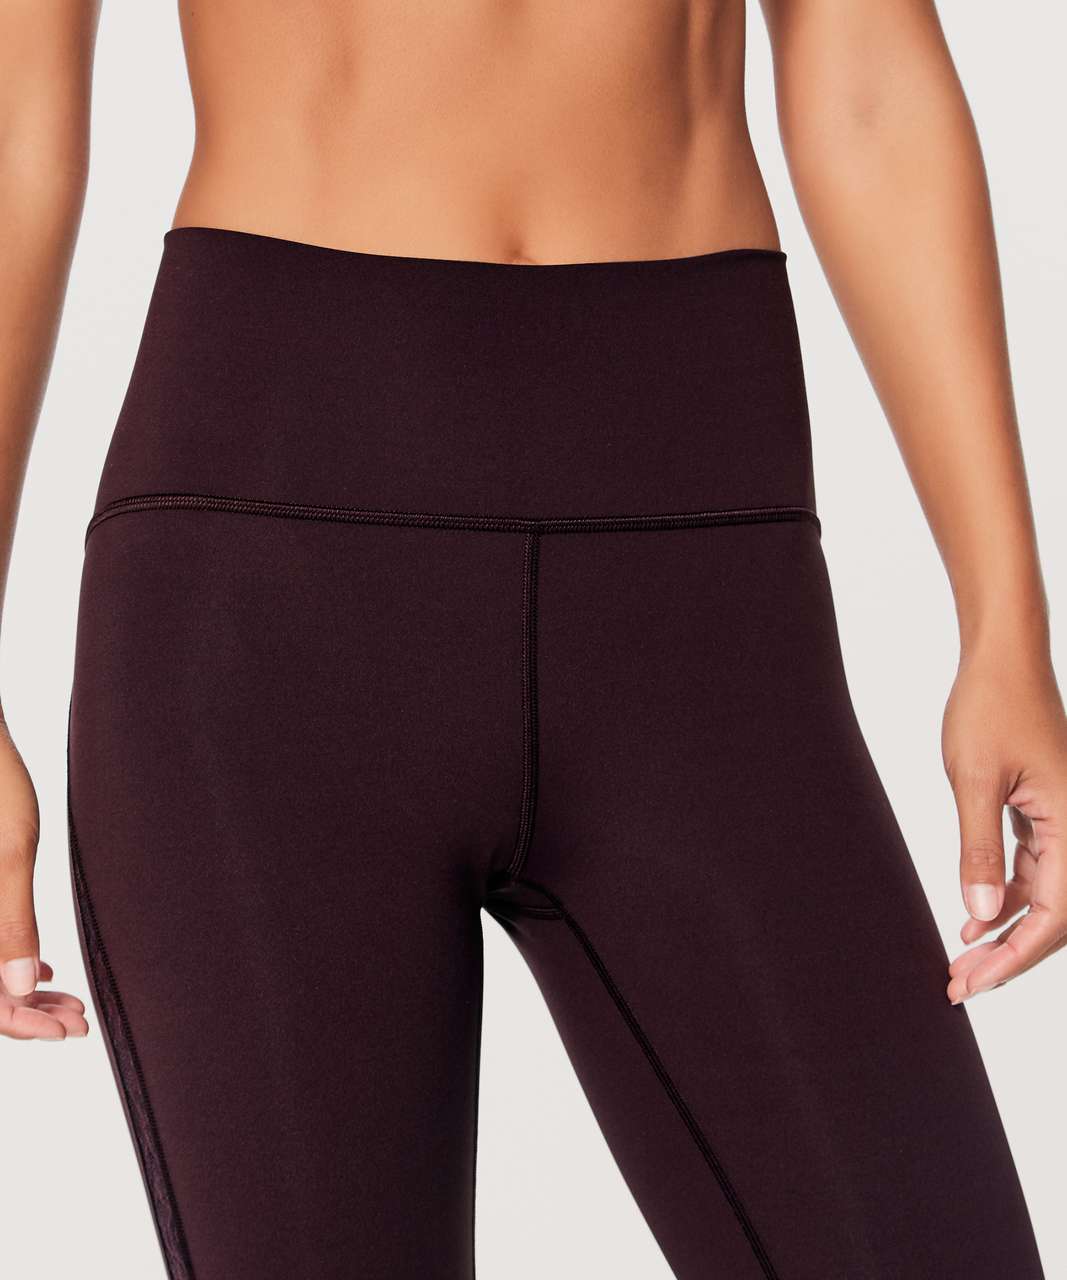 Lululemon Meant To Move 7/8 Tight (25") - Black Cherry / Flocked Floral Black Cherry Black Cherry